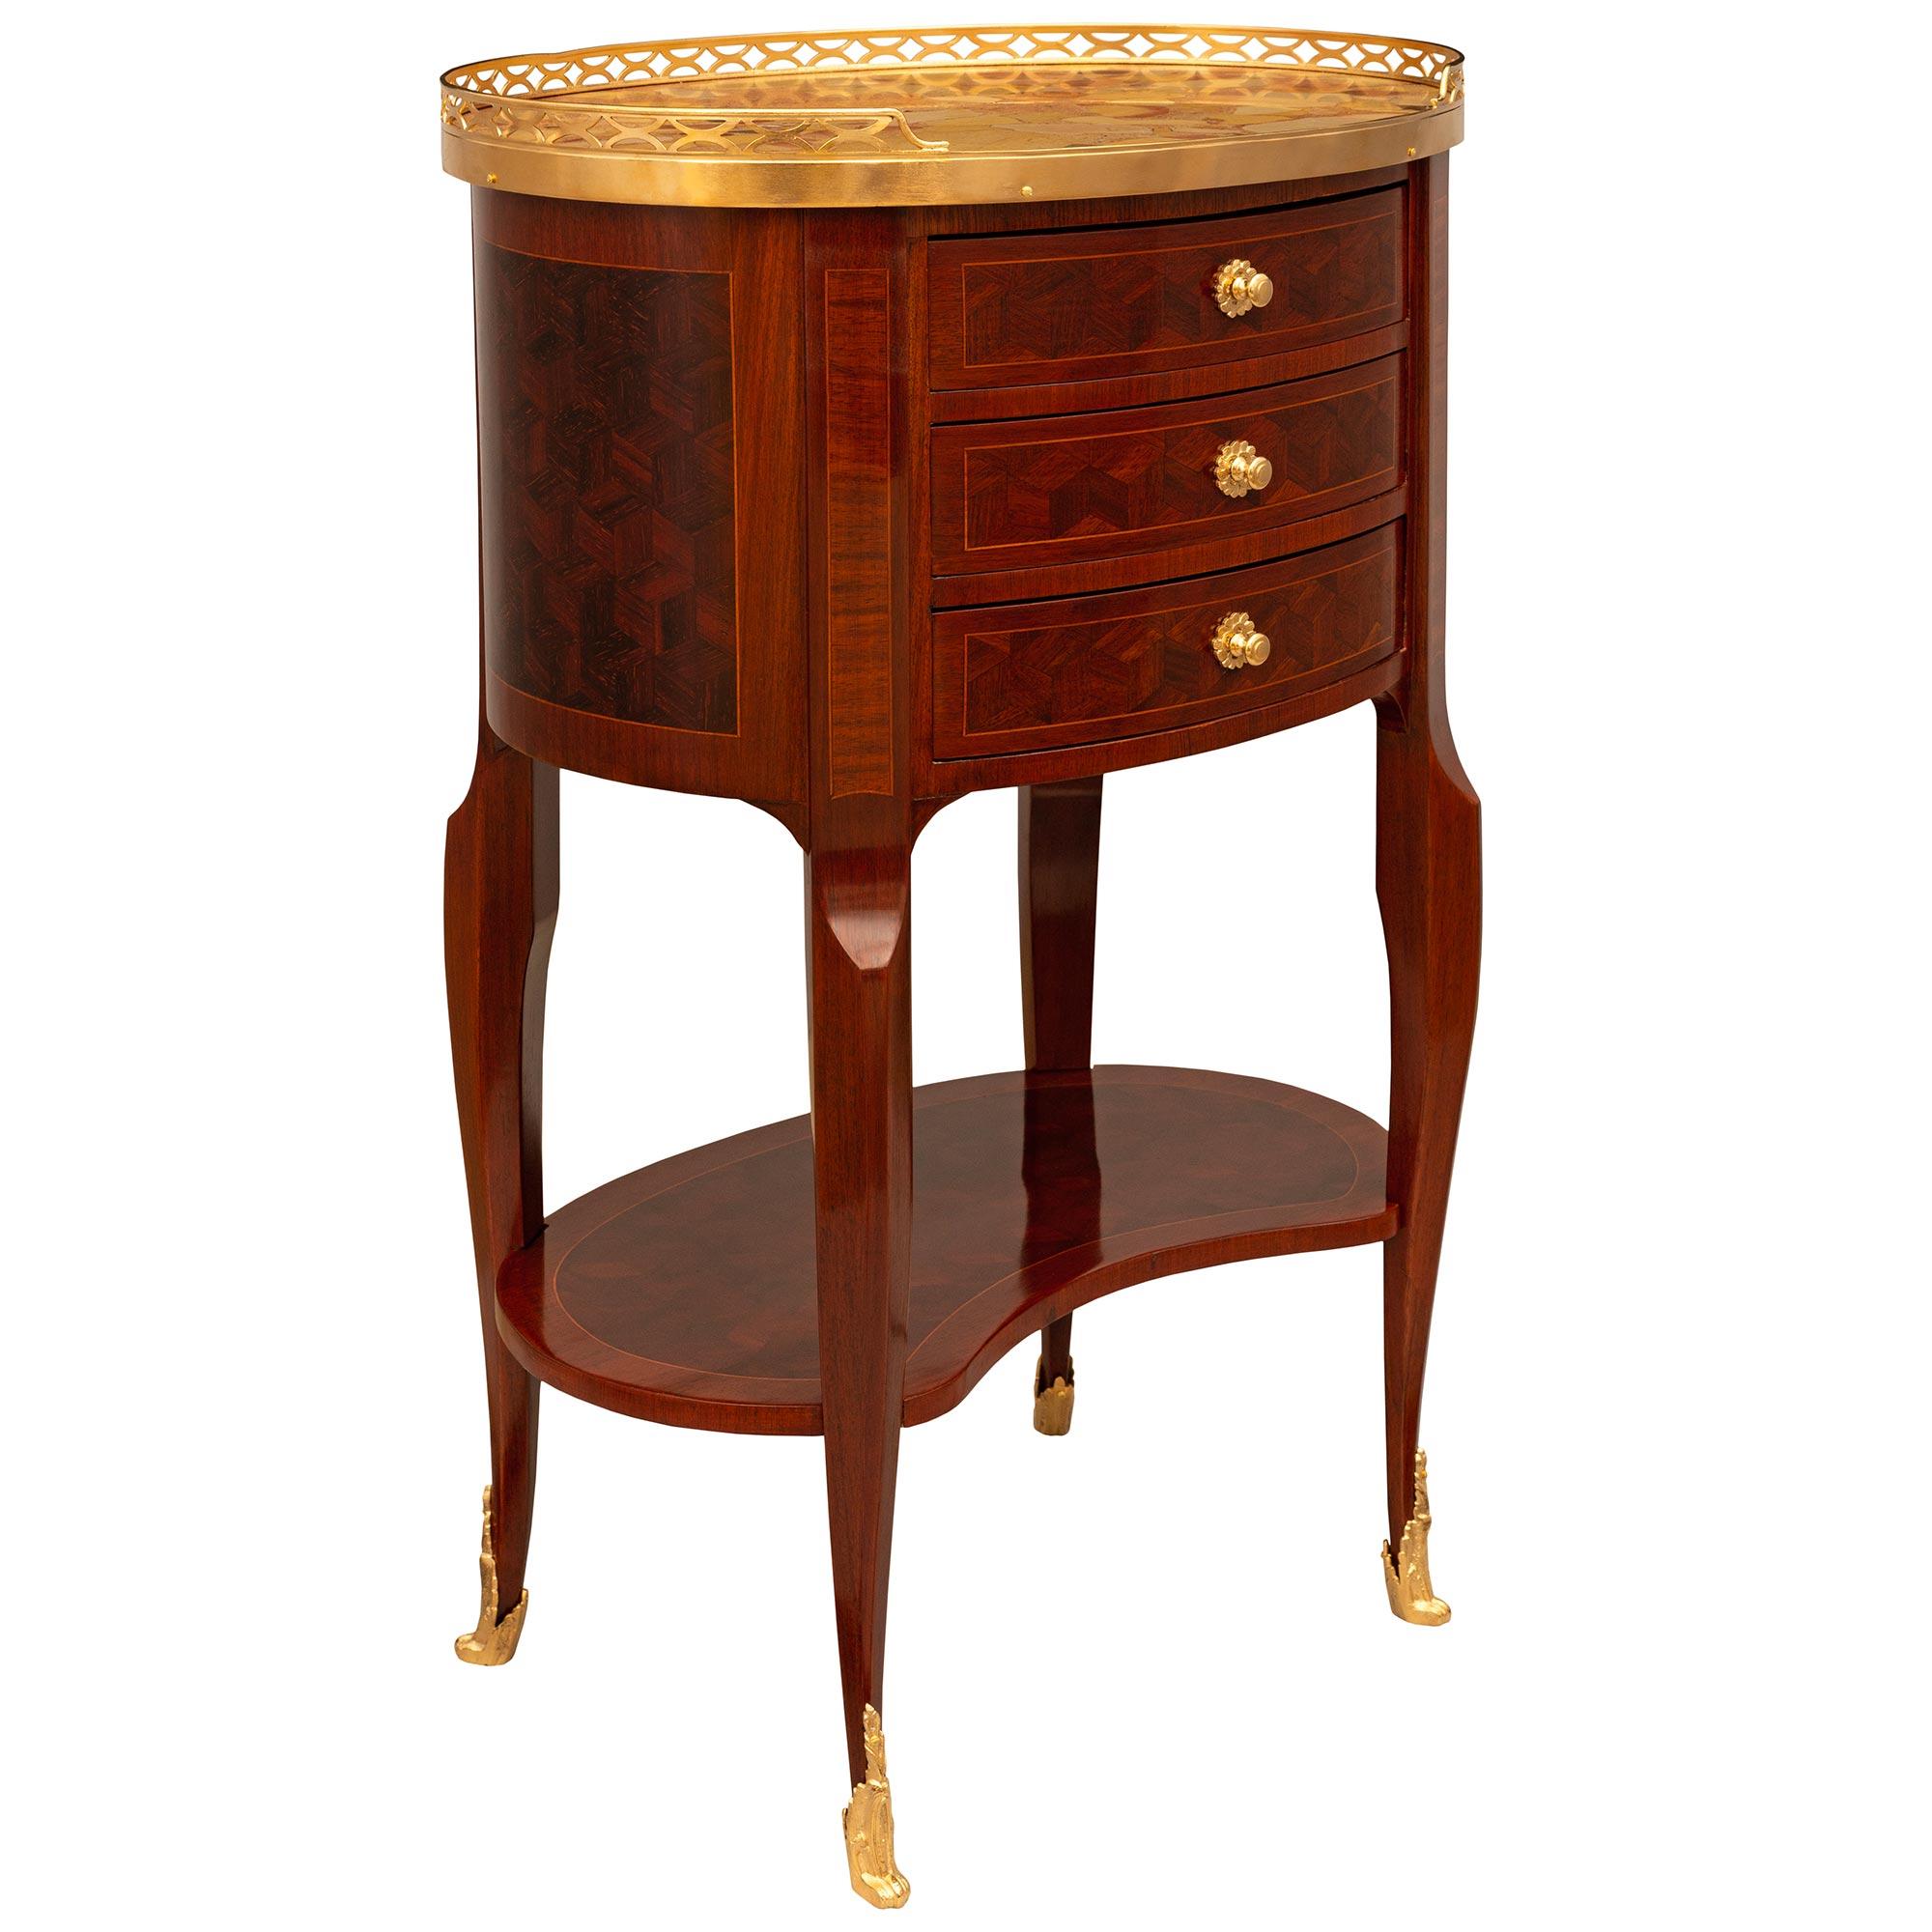 French Late 19th Century Transitional St. Tulipwood, Ormolu & Marble Side Table In Good Condition For Sale In West Palm Beach, FL